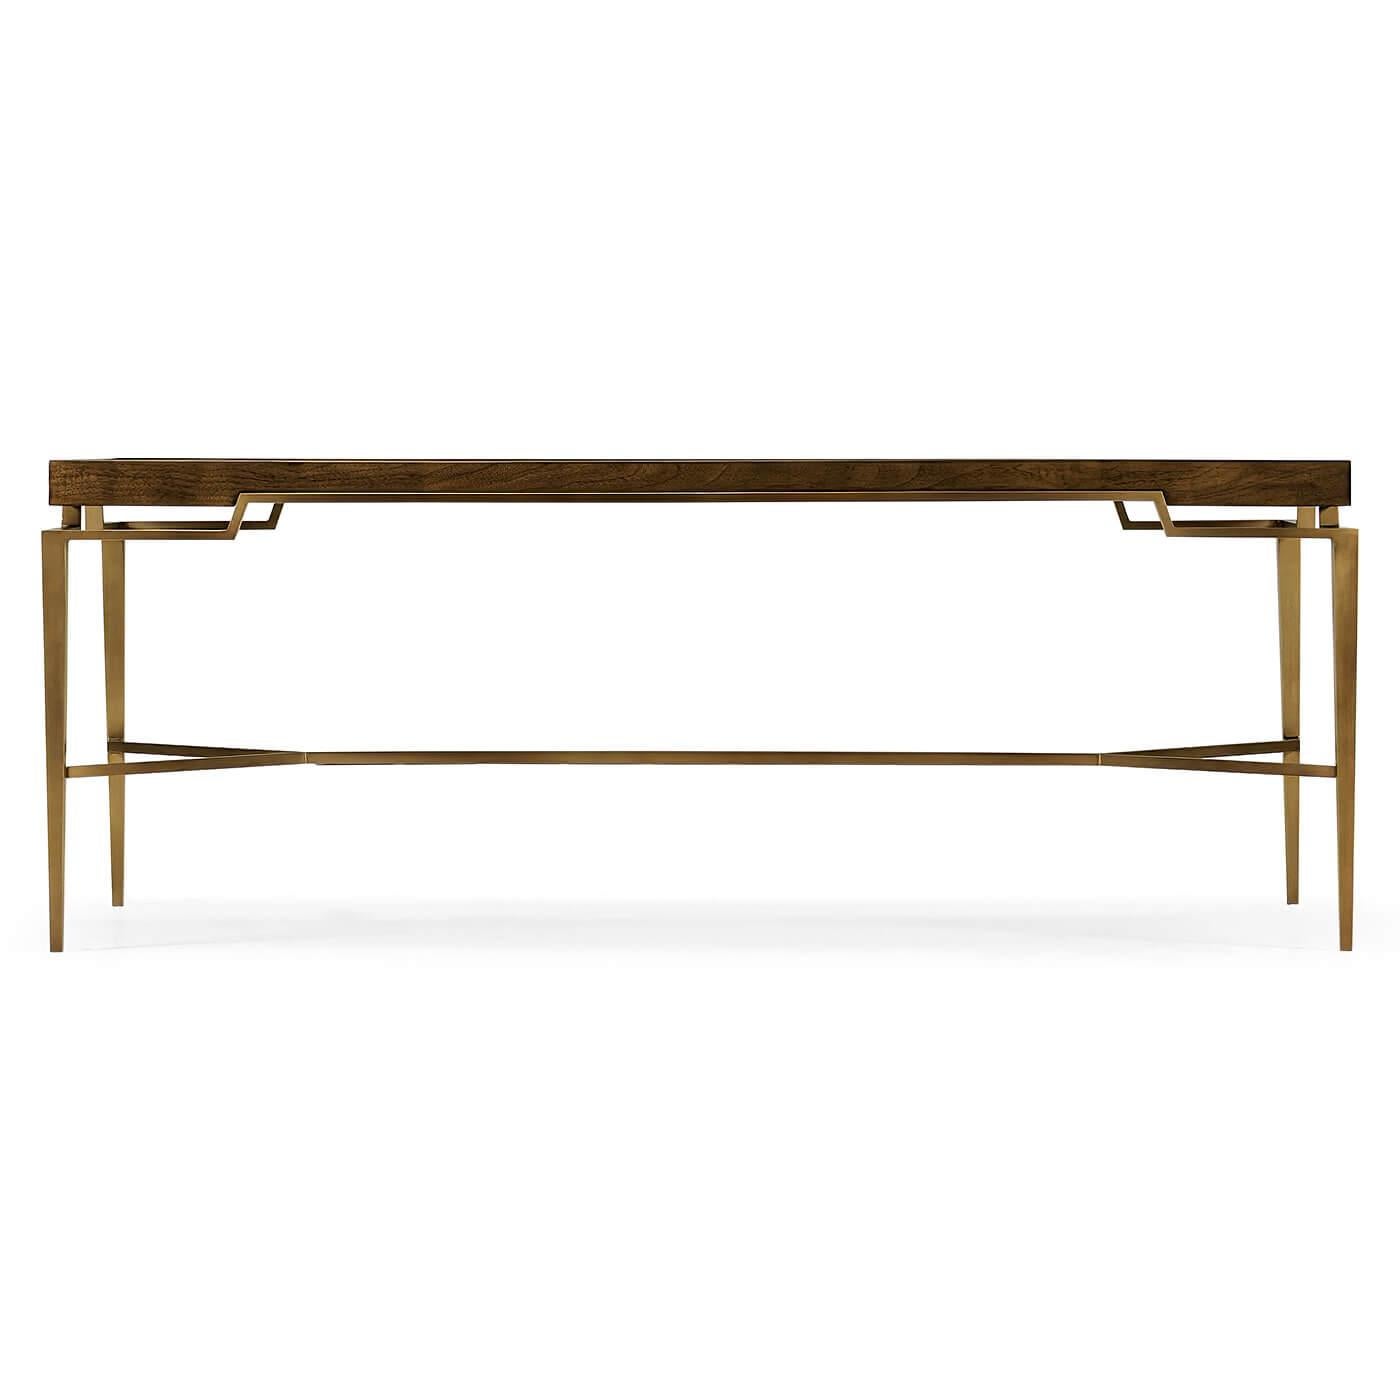 Mid-Century Modern style brass inlaid walnut rectangular form cocktail table. This table features a veneer technique borrowed from the artisans of the Italian Renaissance. Inlays and base are solid brass with an acid dipped, hand-rubbed